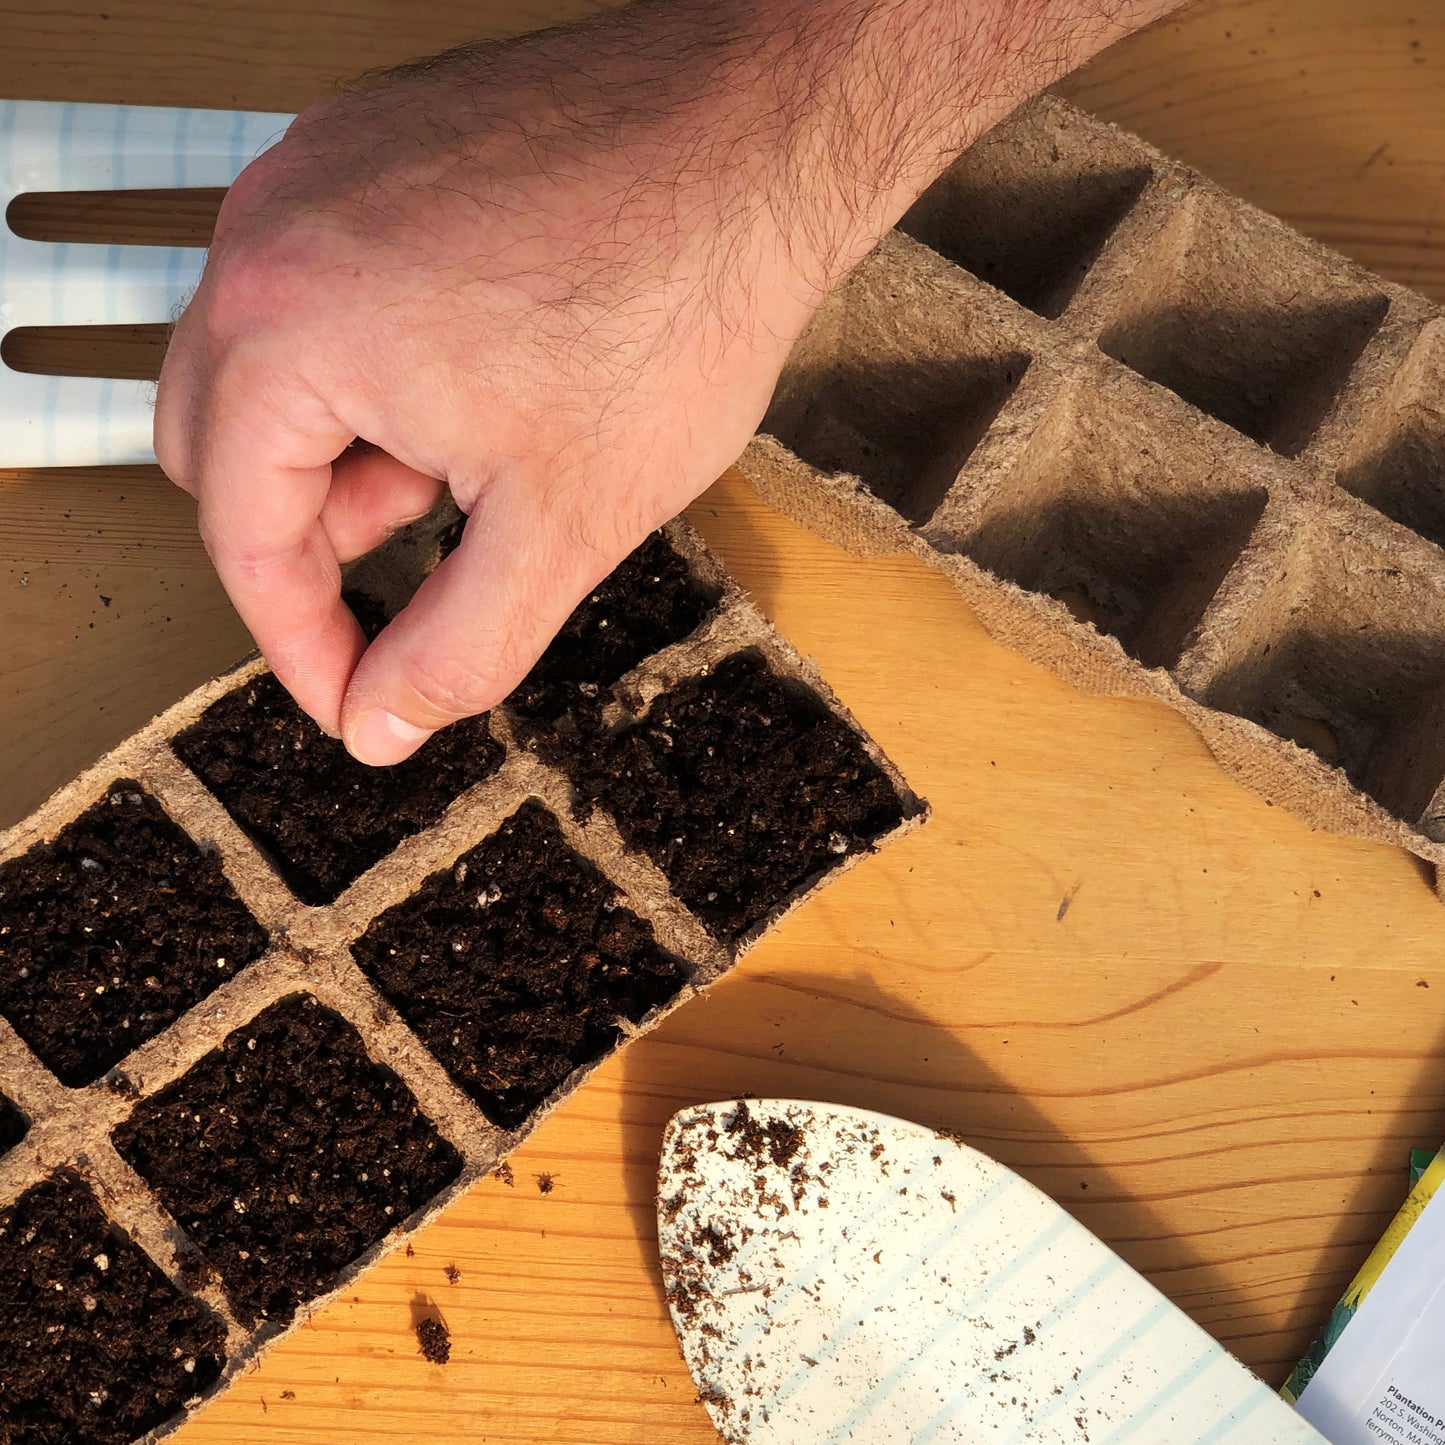 Starting Organic Clemson Spineless #80 Okra Seeds in Jiffy biodegradable peat strip trays which easily tear apart when it's time to transplant cucumber seedlings outdoors. Plant seedling with tray.